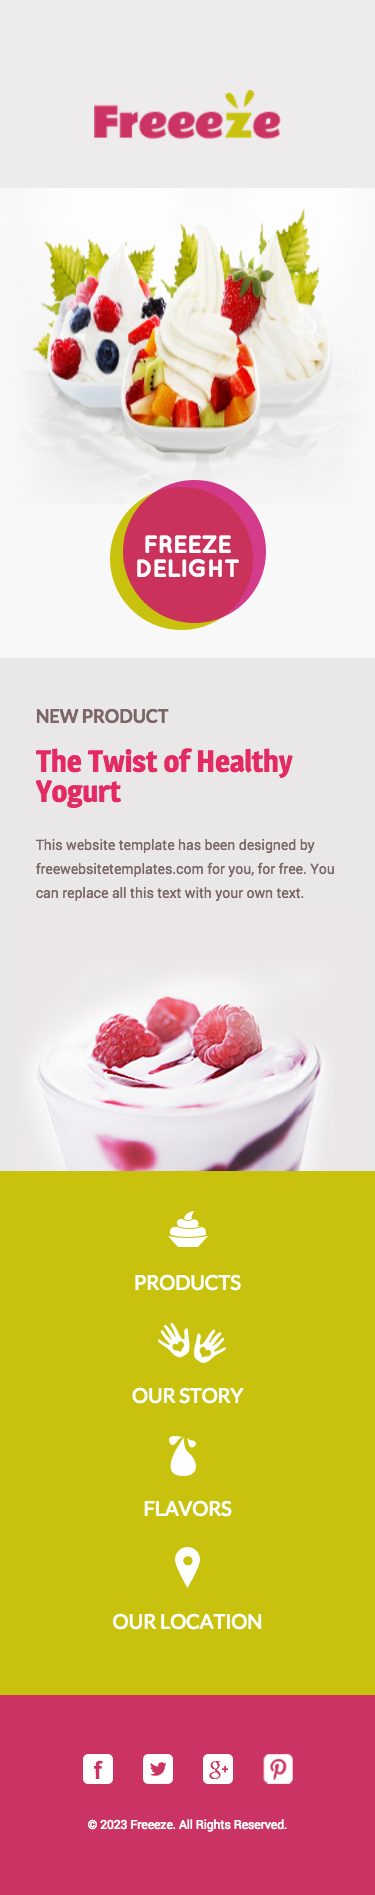 Froyo Mobile design